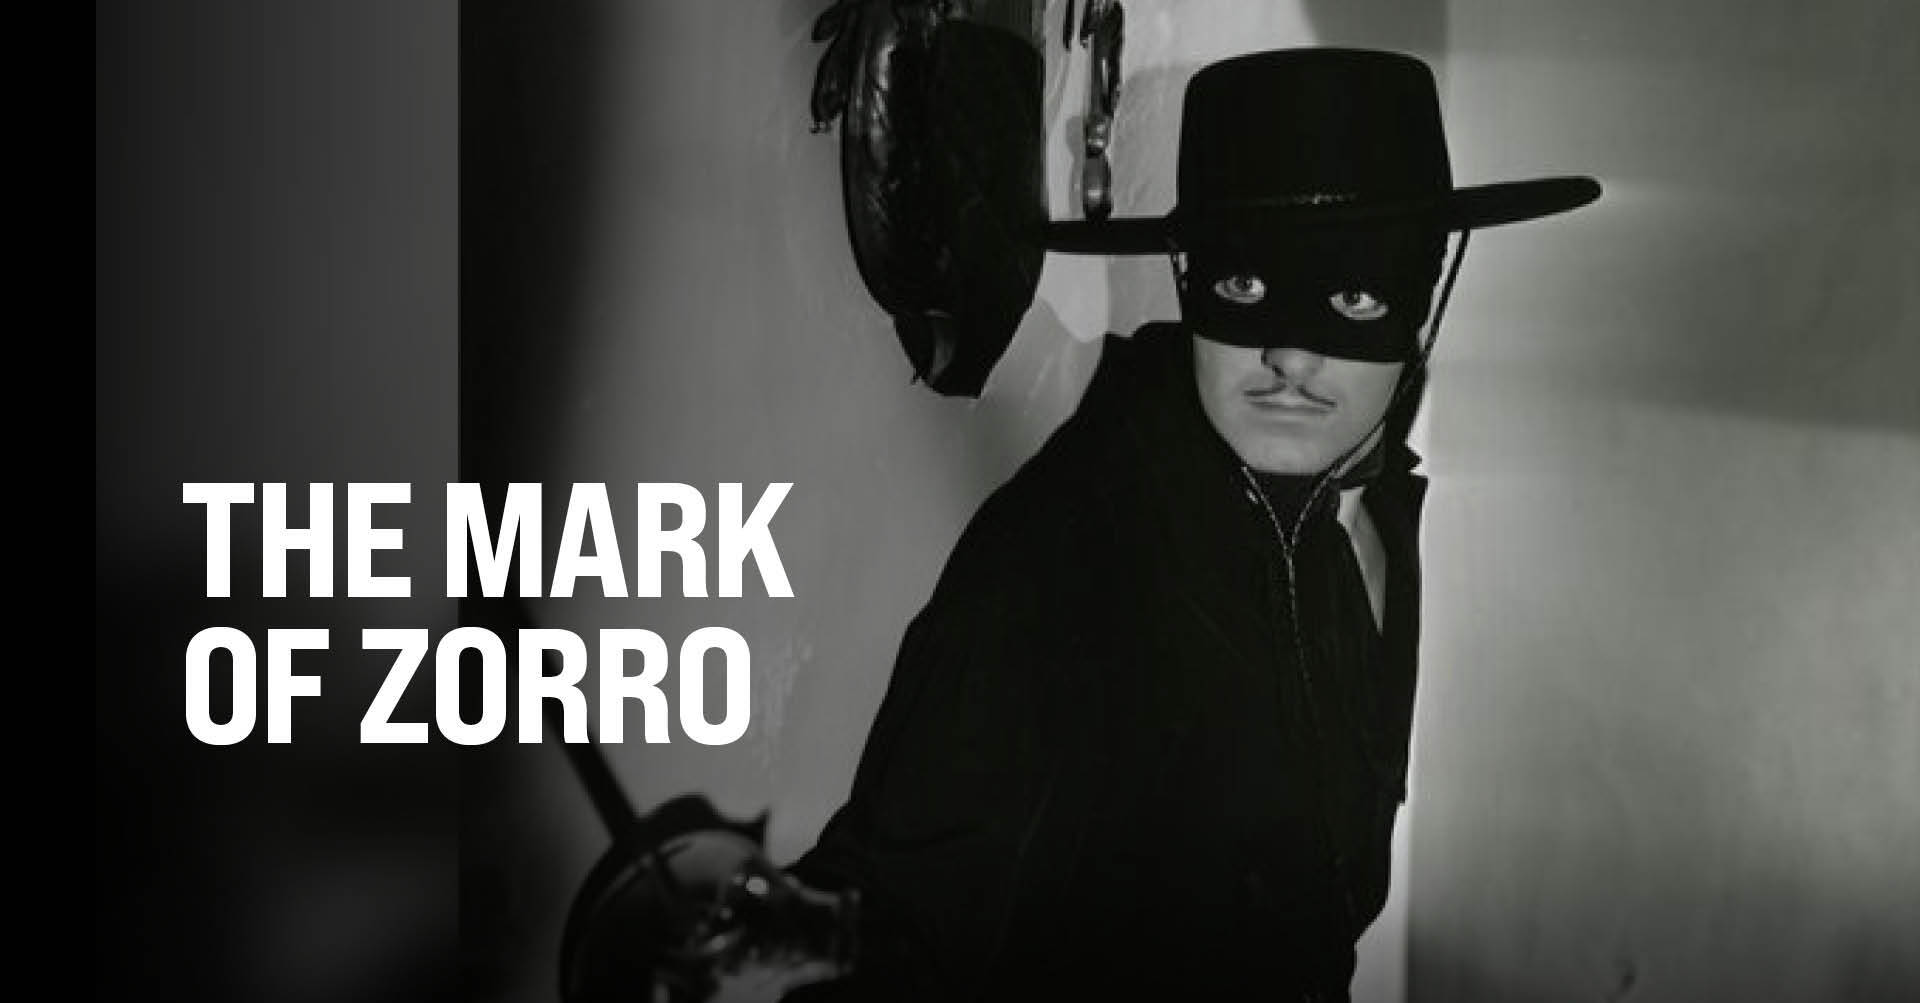 42-facts-about-the-movie-the-mark-of-zorro